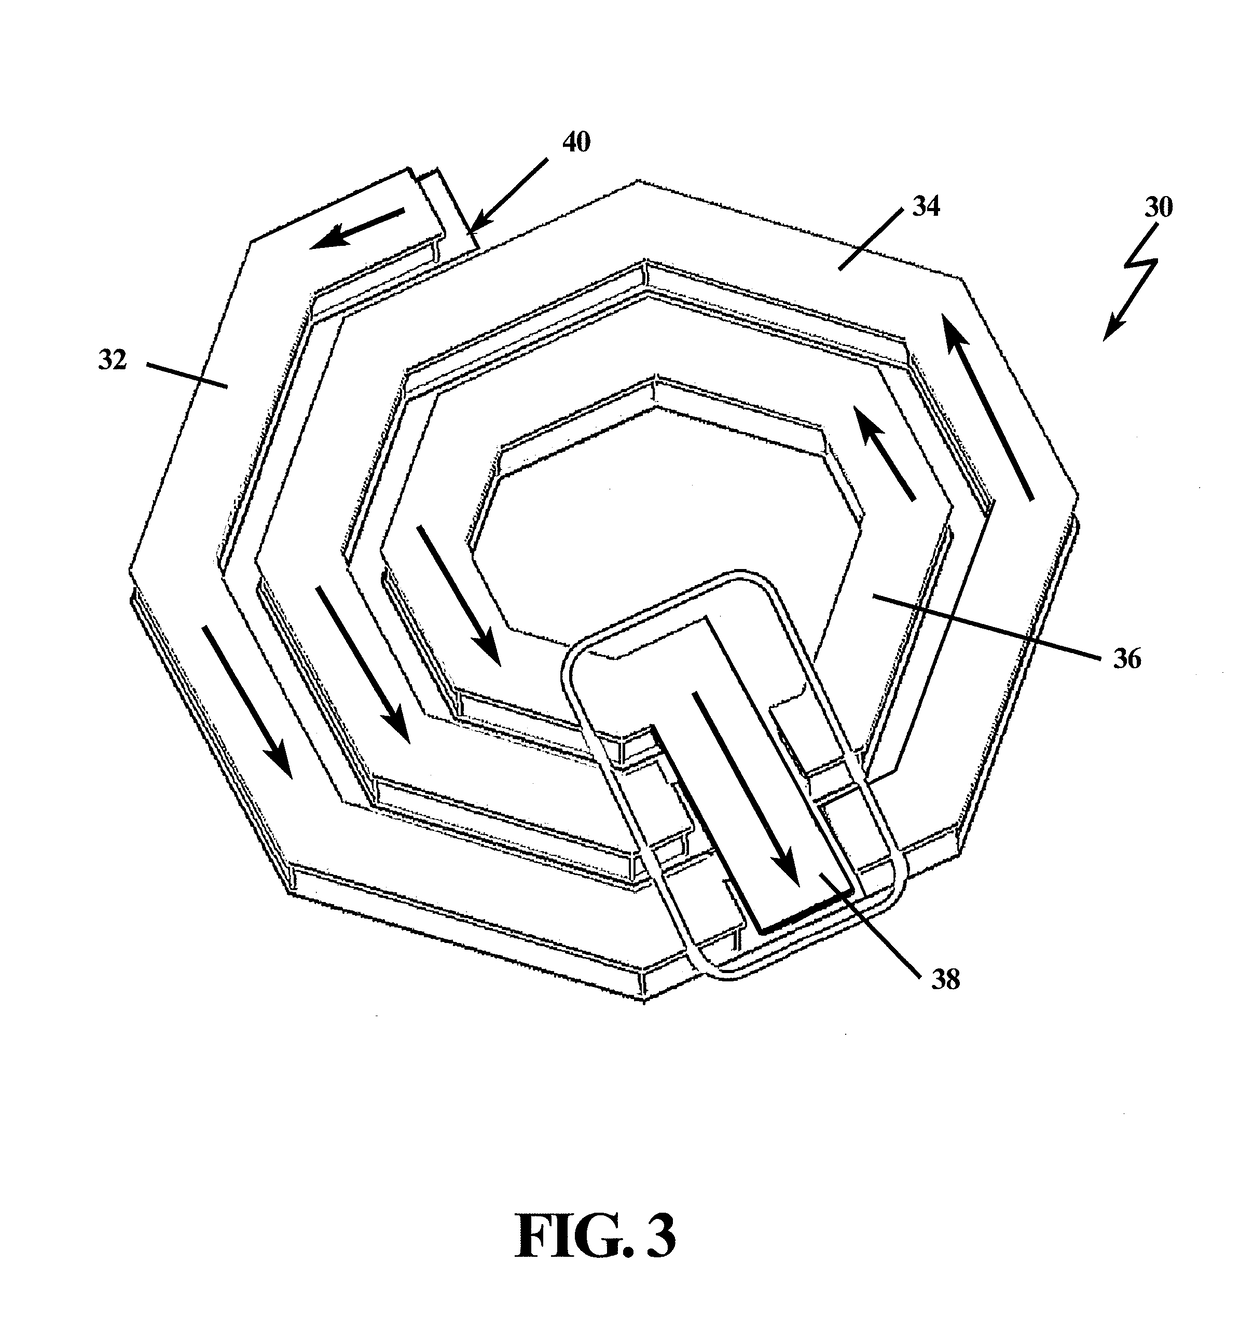 Parallel Stacked Inductor for High-Q and High Current Handling and Method of Making the Same